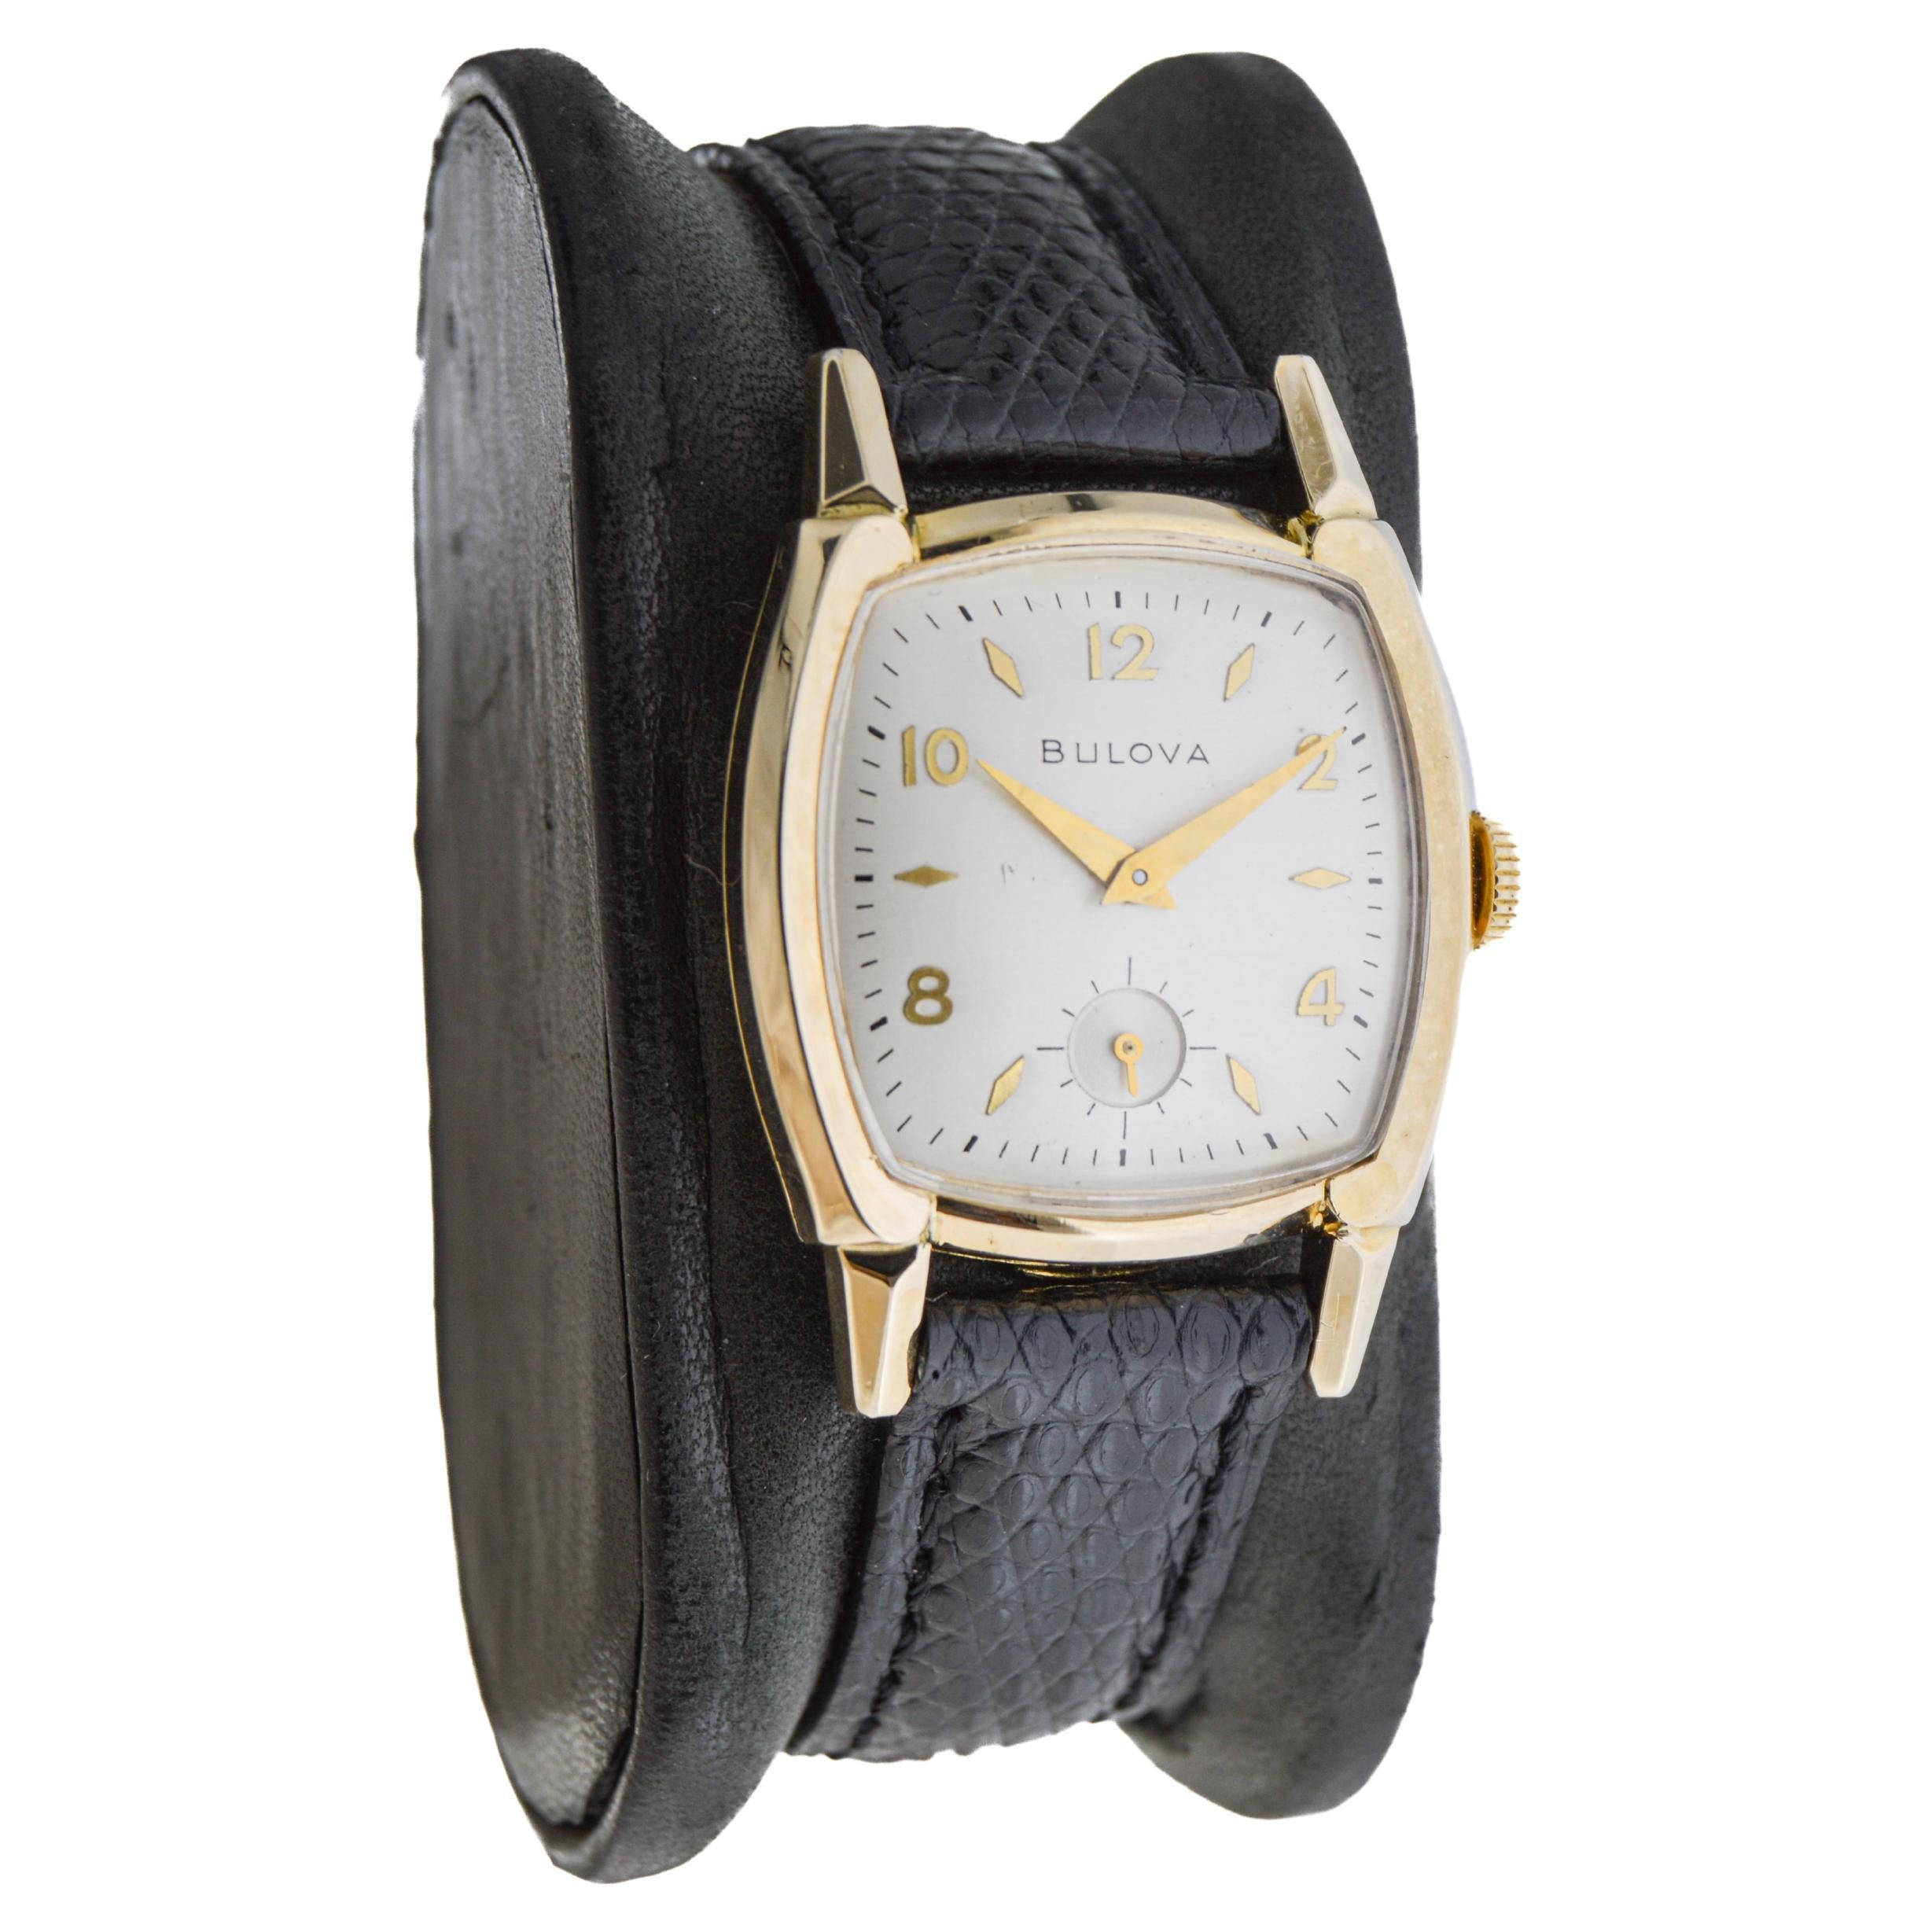 FACTORY / HOUSE: Bulova Watch Company
STYLE / REFERENCE: Art Deco / Tortue Shape
METAL / MATERIAL: Yellow Gold-Filled
CIRCA / YEAR: 1940's
DIMENSIONS / SIZE: Length 38mm X Width 27mm
MOVEMENT / CALIBER: Manual Winding / 21 Jewels / Caliber 10BM
DIAL